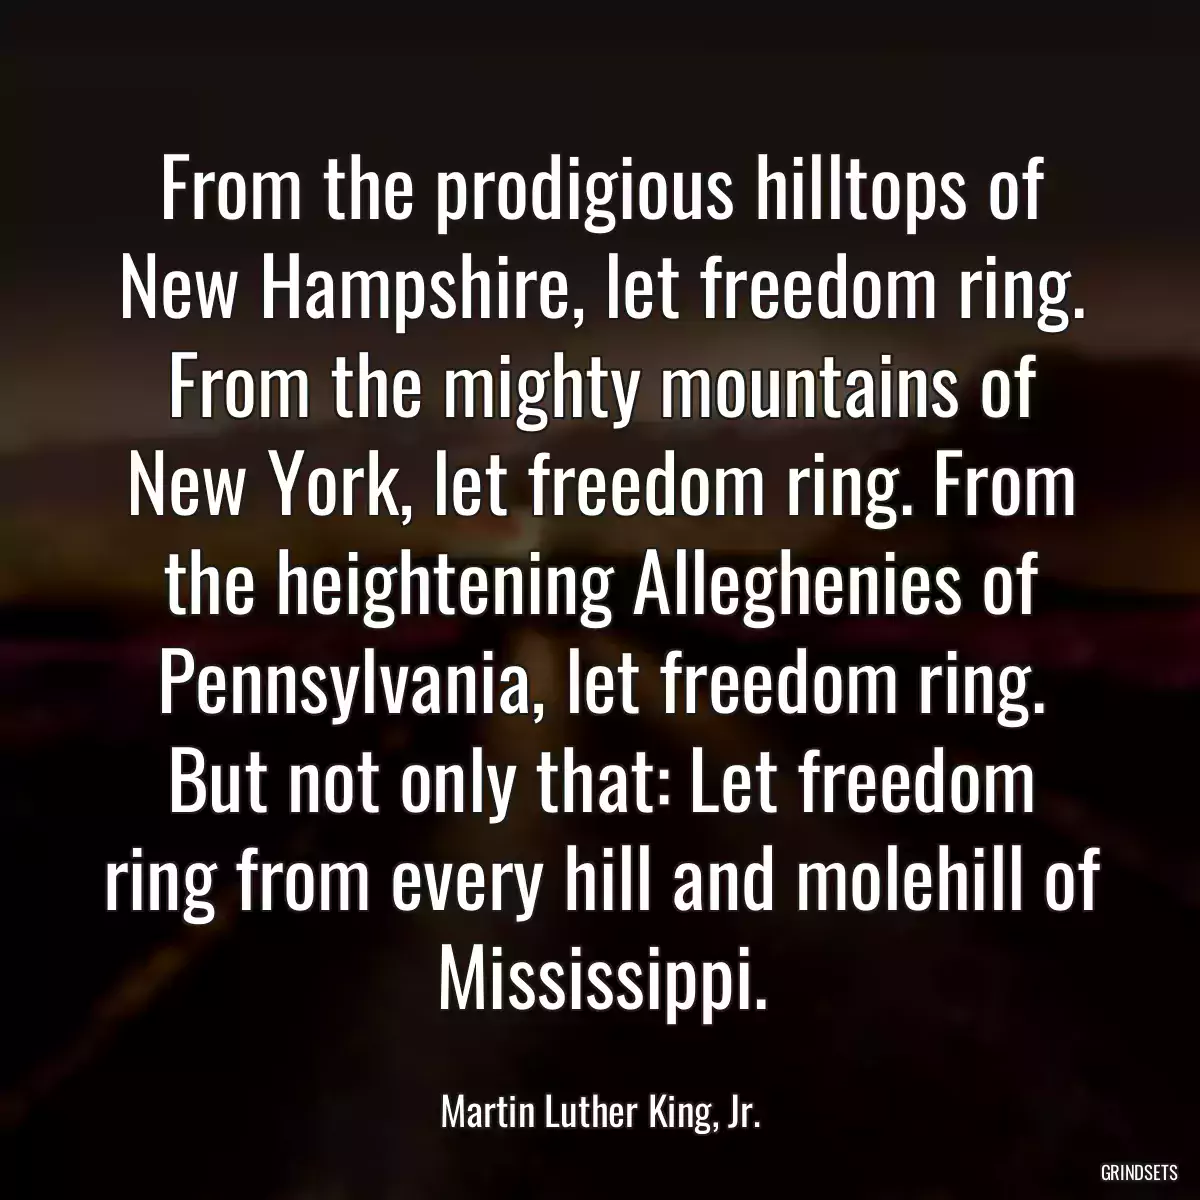 From the prodigious hilltops of New Hampshire, let freedom ring. From the mighty mountains of New York, let freedom ring. From the heightening Alleghenies of Pennsylvania, let freedom ring. But not only that: Let freedom ring from every hill and molehill of Mississippi.